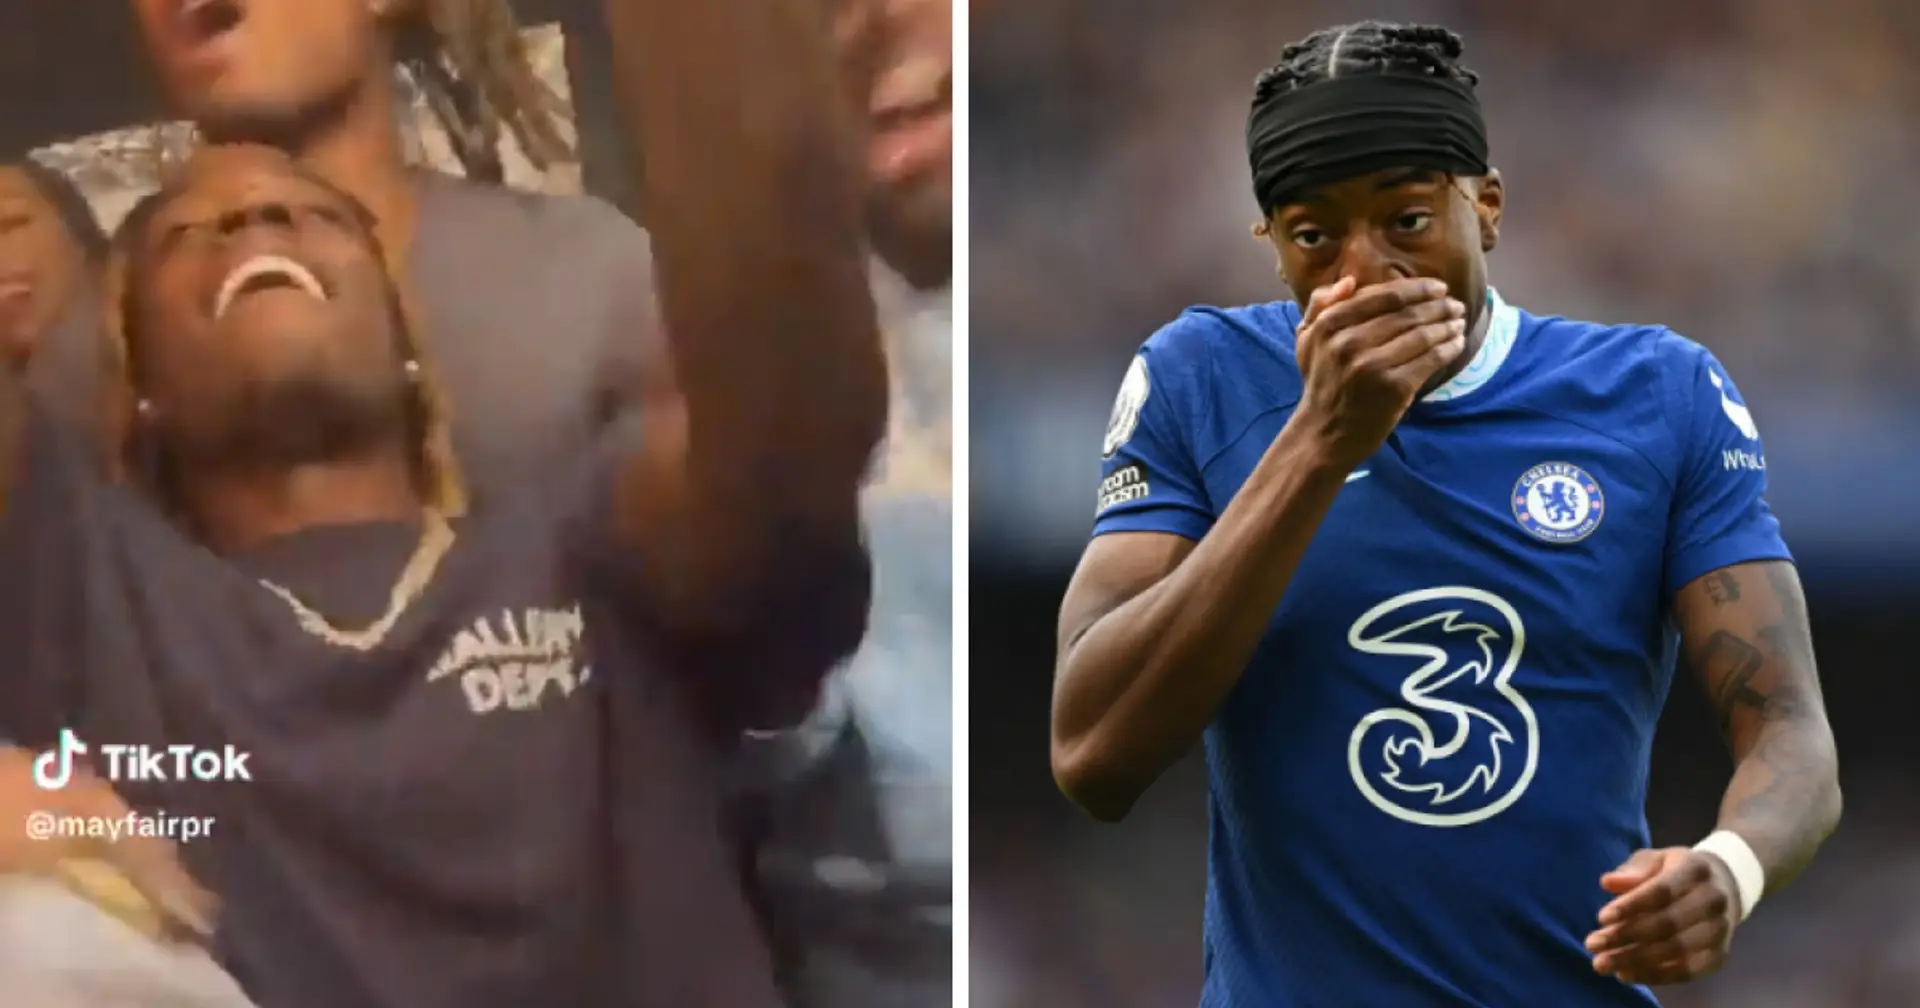 'He ain’t serious': Chelsea fans react to Madueke partying at a nightclub during the international break